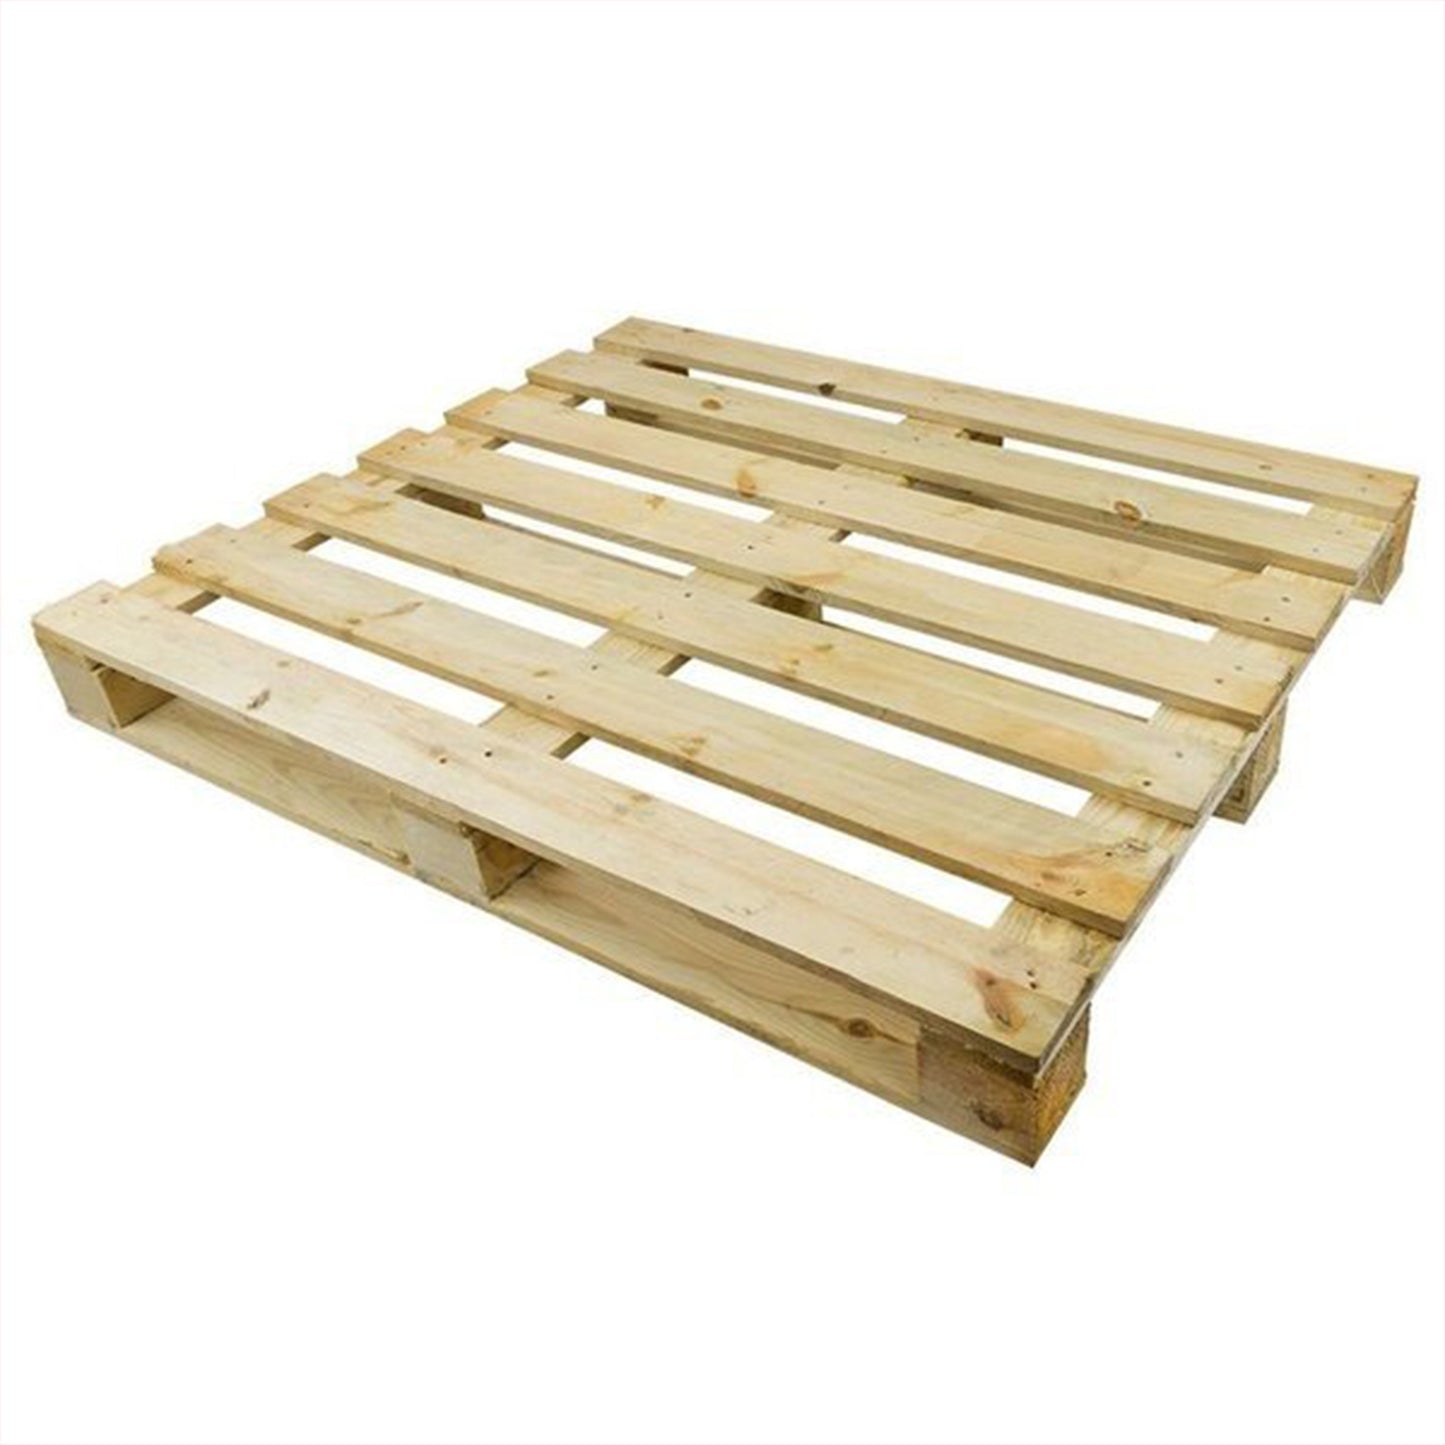 EPAL marked treated wooden pallet 1.2m long and 1.2m wide